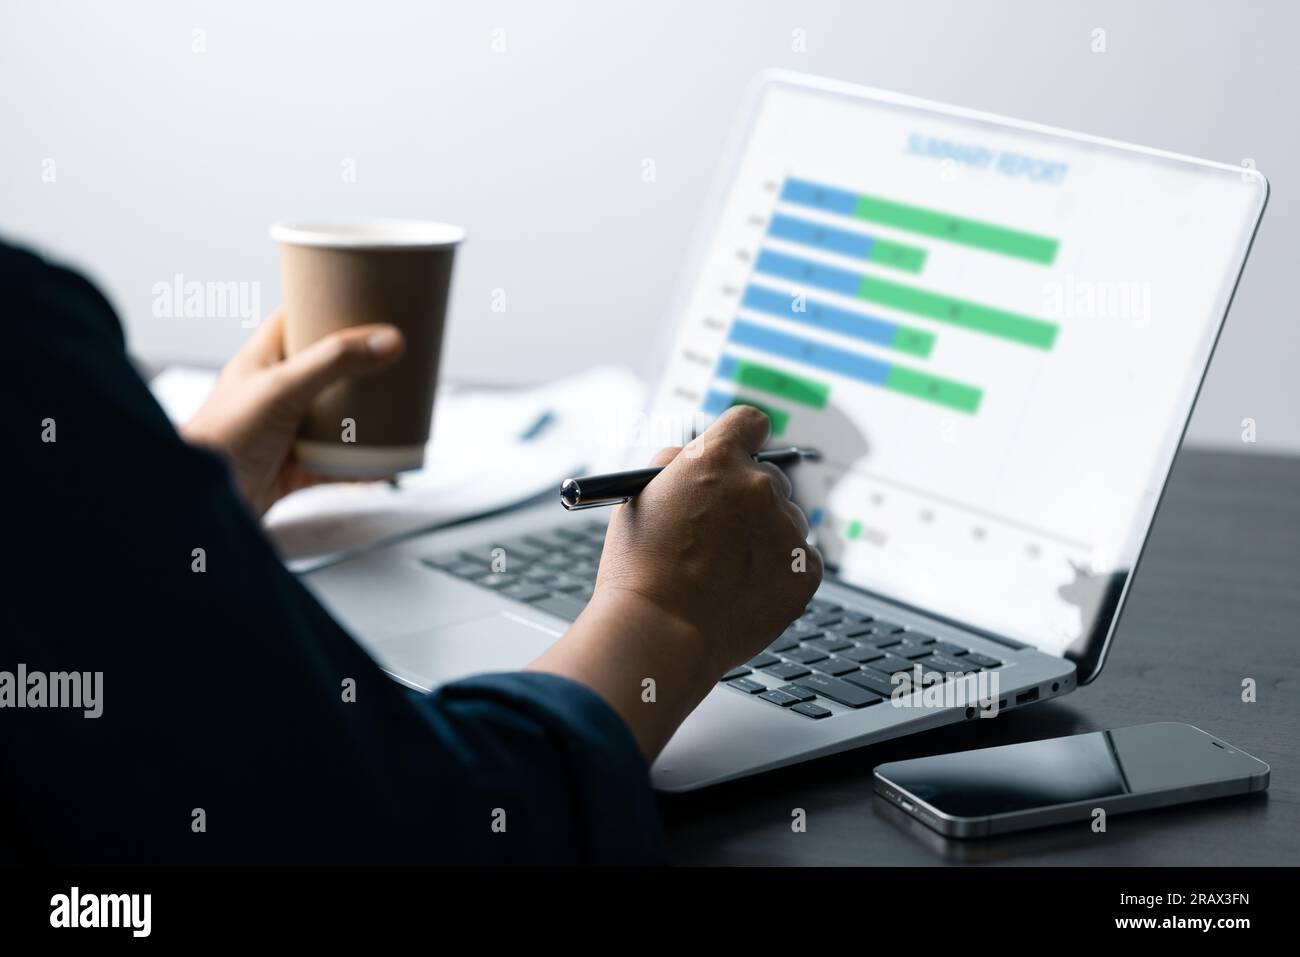 Business Data Analysis on Laptop: Financial Charts, Graphs, Reports for Successful Planning and Strategy. Professional Workplace: Analyzing Business D Stock Photo